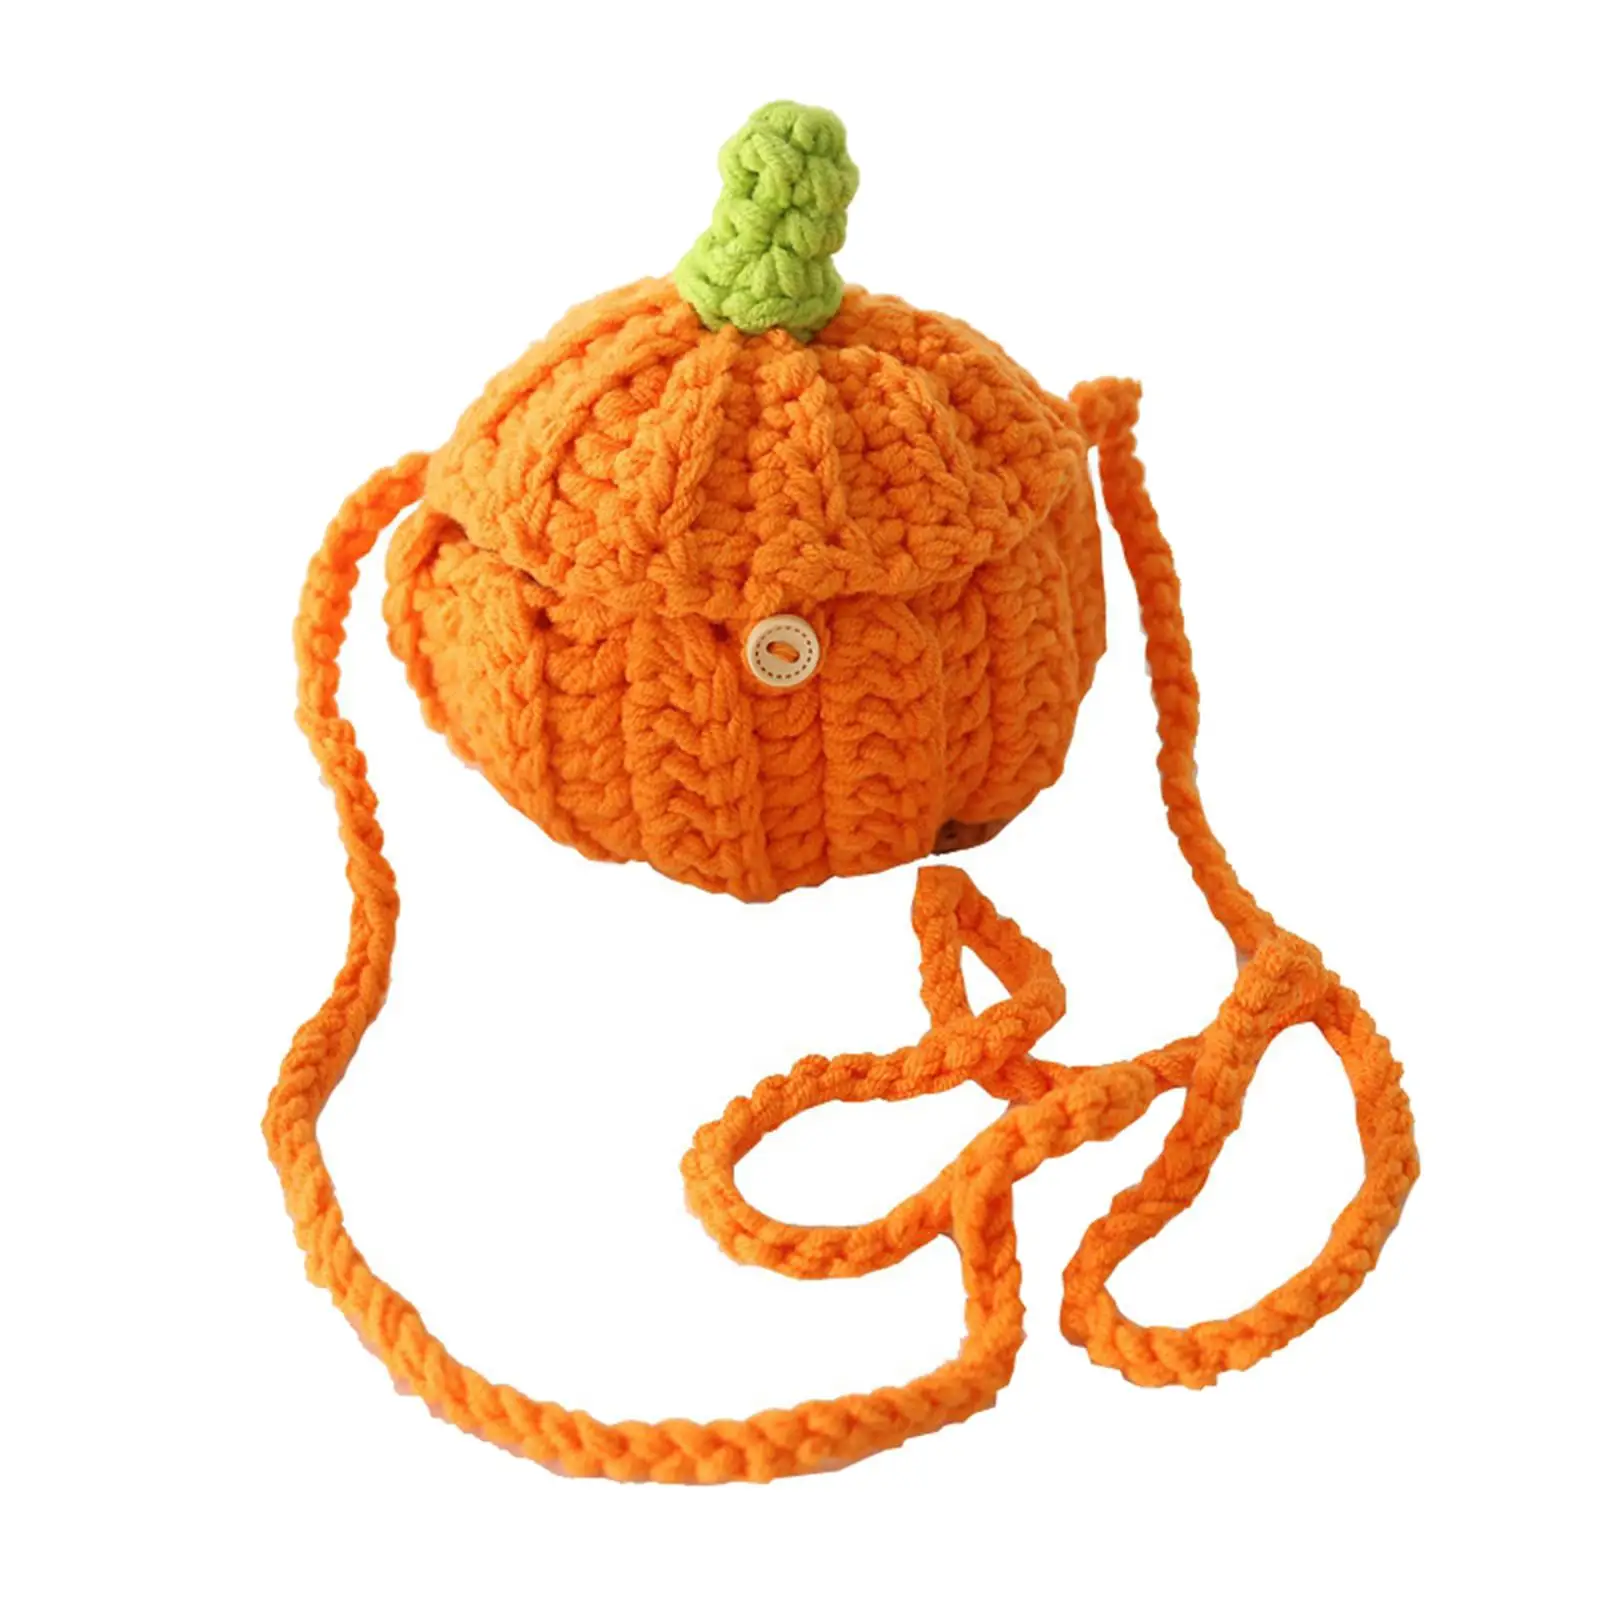 Pumpkin Crossbody Bag Portable Novelty Adorable Tote Coin Purse for Travel Shopping Costume Party Thanksgiving Stage Performance